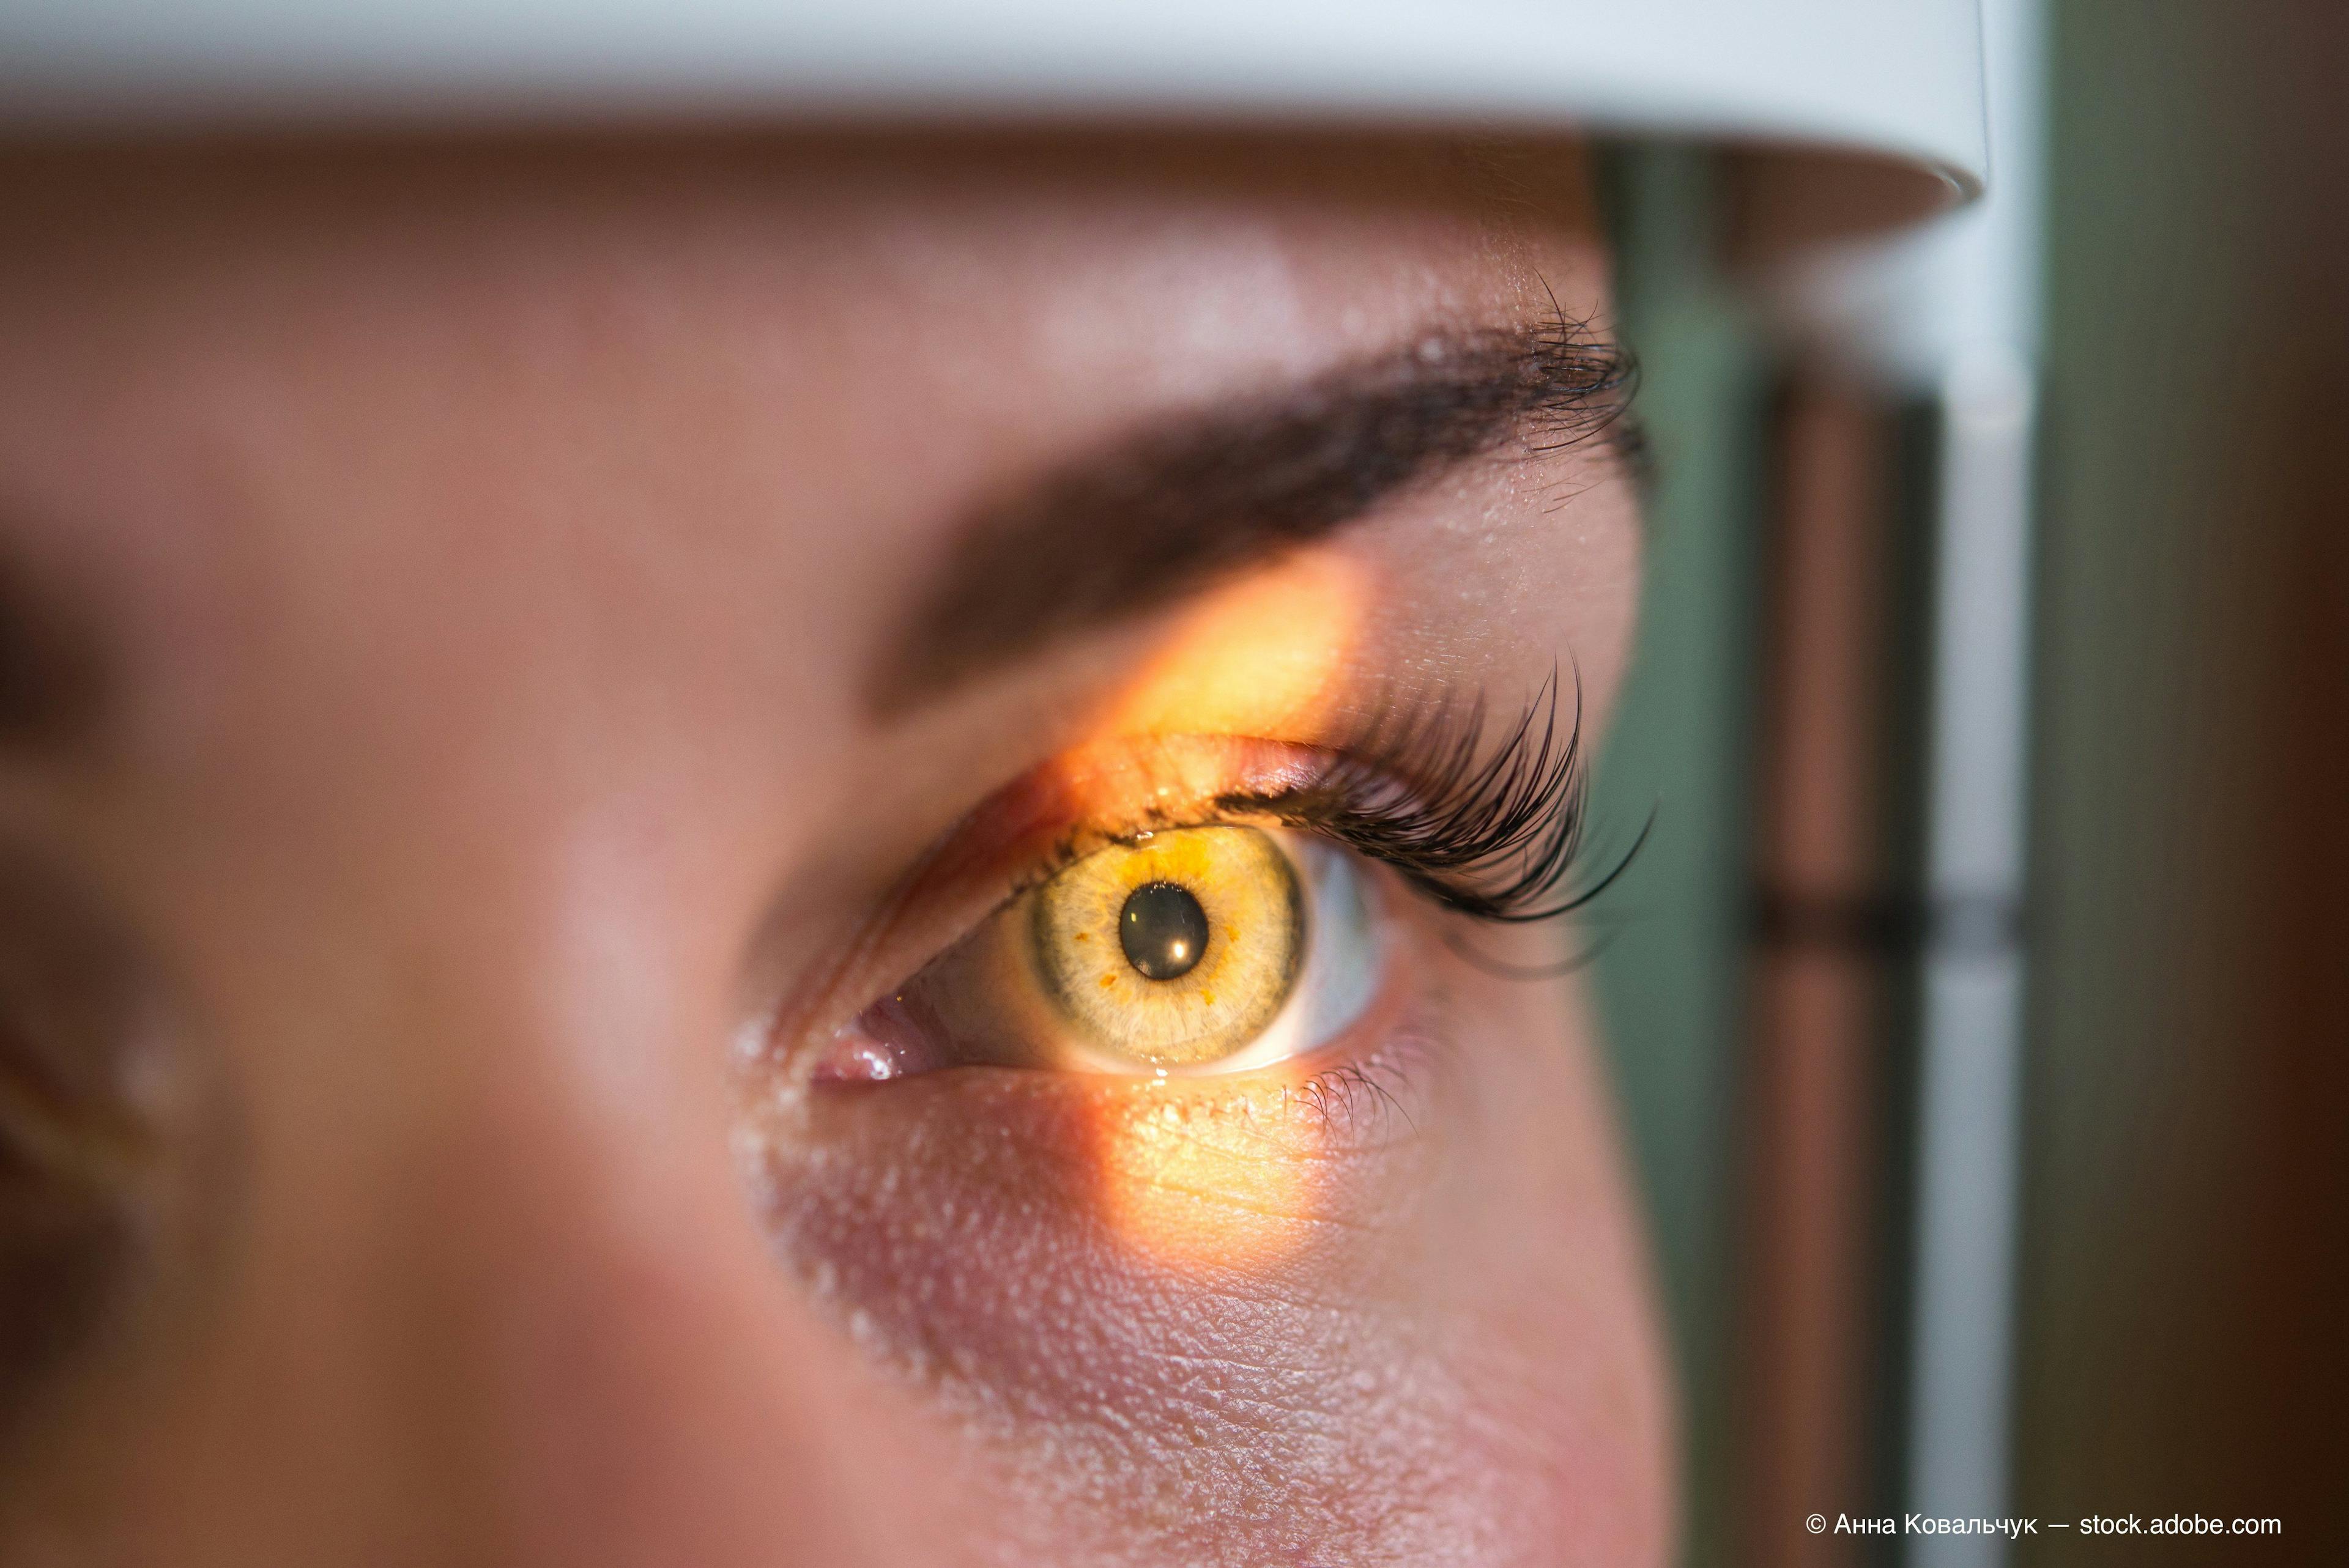 Bariatric surgery may be linked to changes on corneal sensitivity 